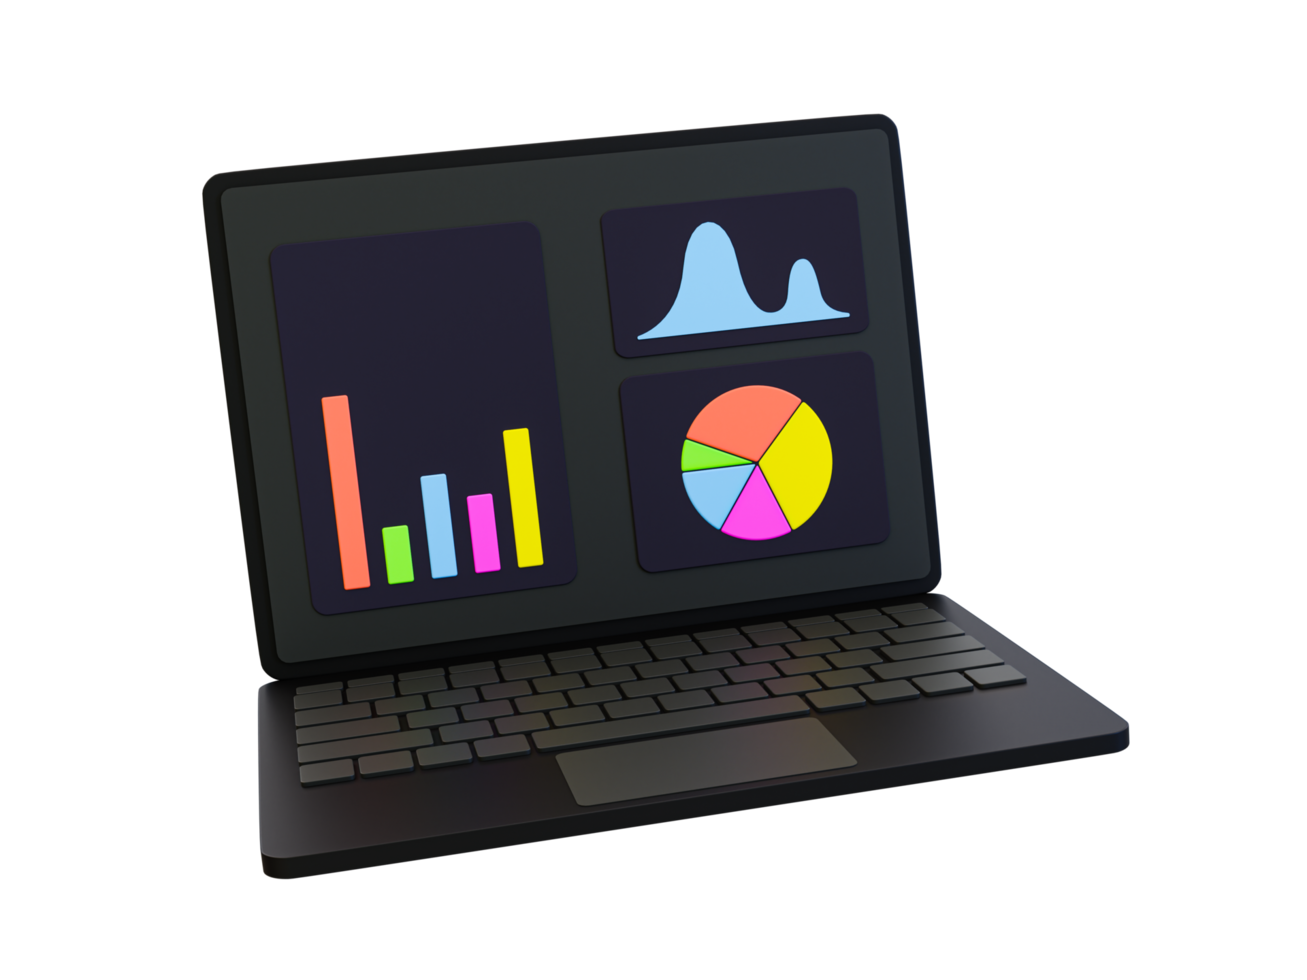 3d minimal laptop with statistic graph. trading charts. Stock market forecasting. 3d illustration. png